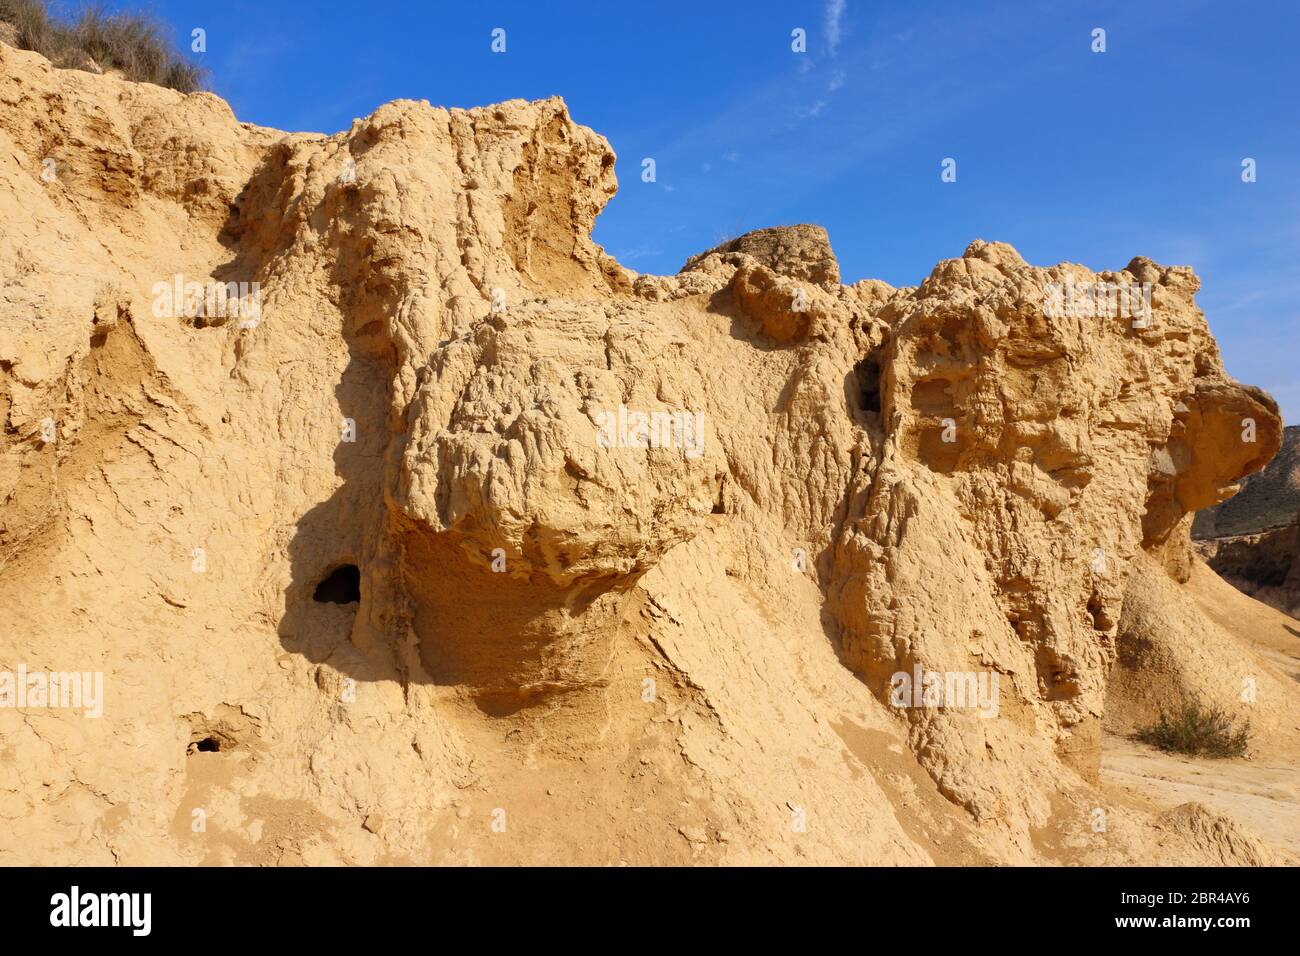 Close-up of sediments and erosional features in the semi-desert natural region Bardenas Reales, UNESCO Biosphere Reserve, Navarra, Spain Stock Photo